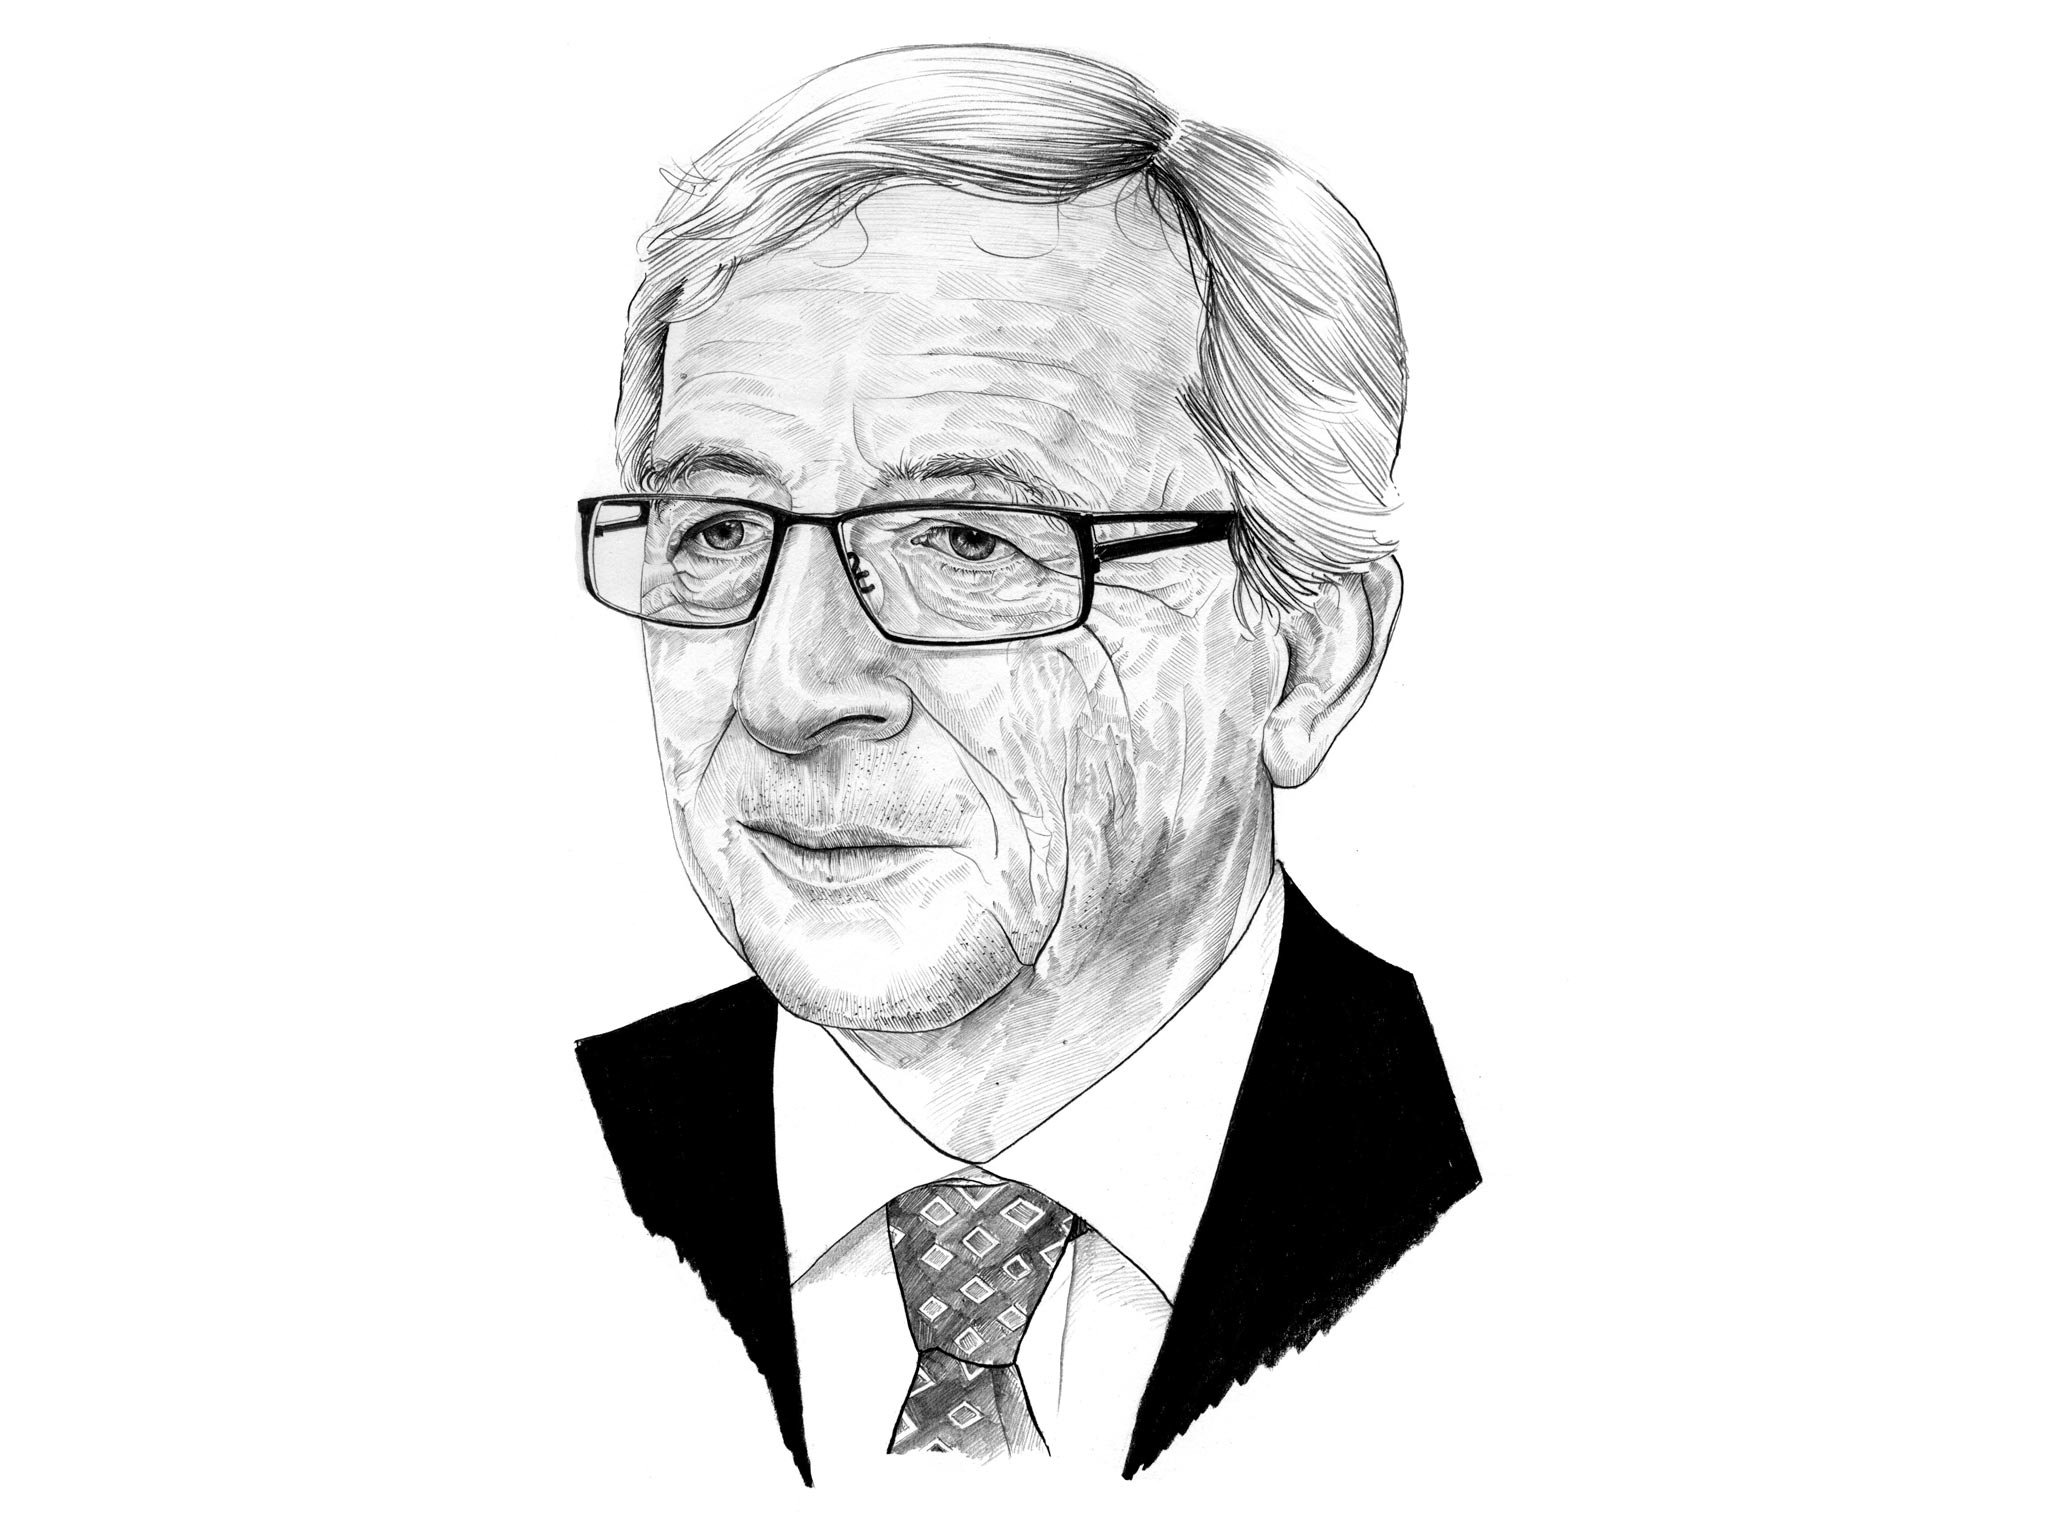 Jean-Claude Juncker’s abilities as a master of Byzantine Brussels are beyond doubt